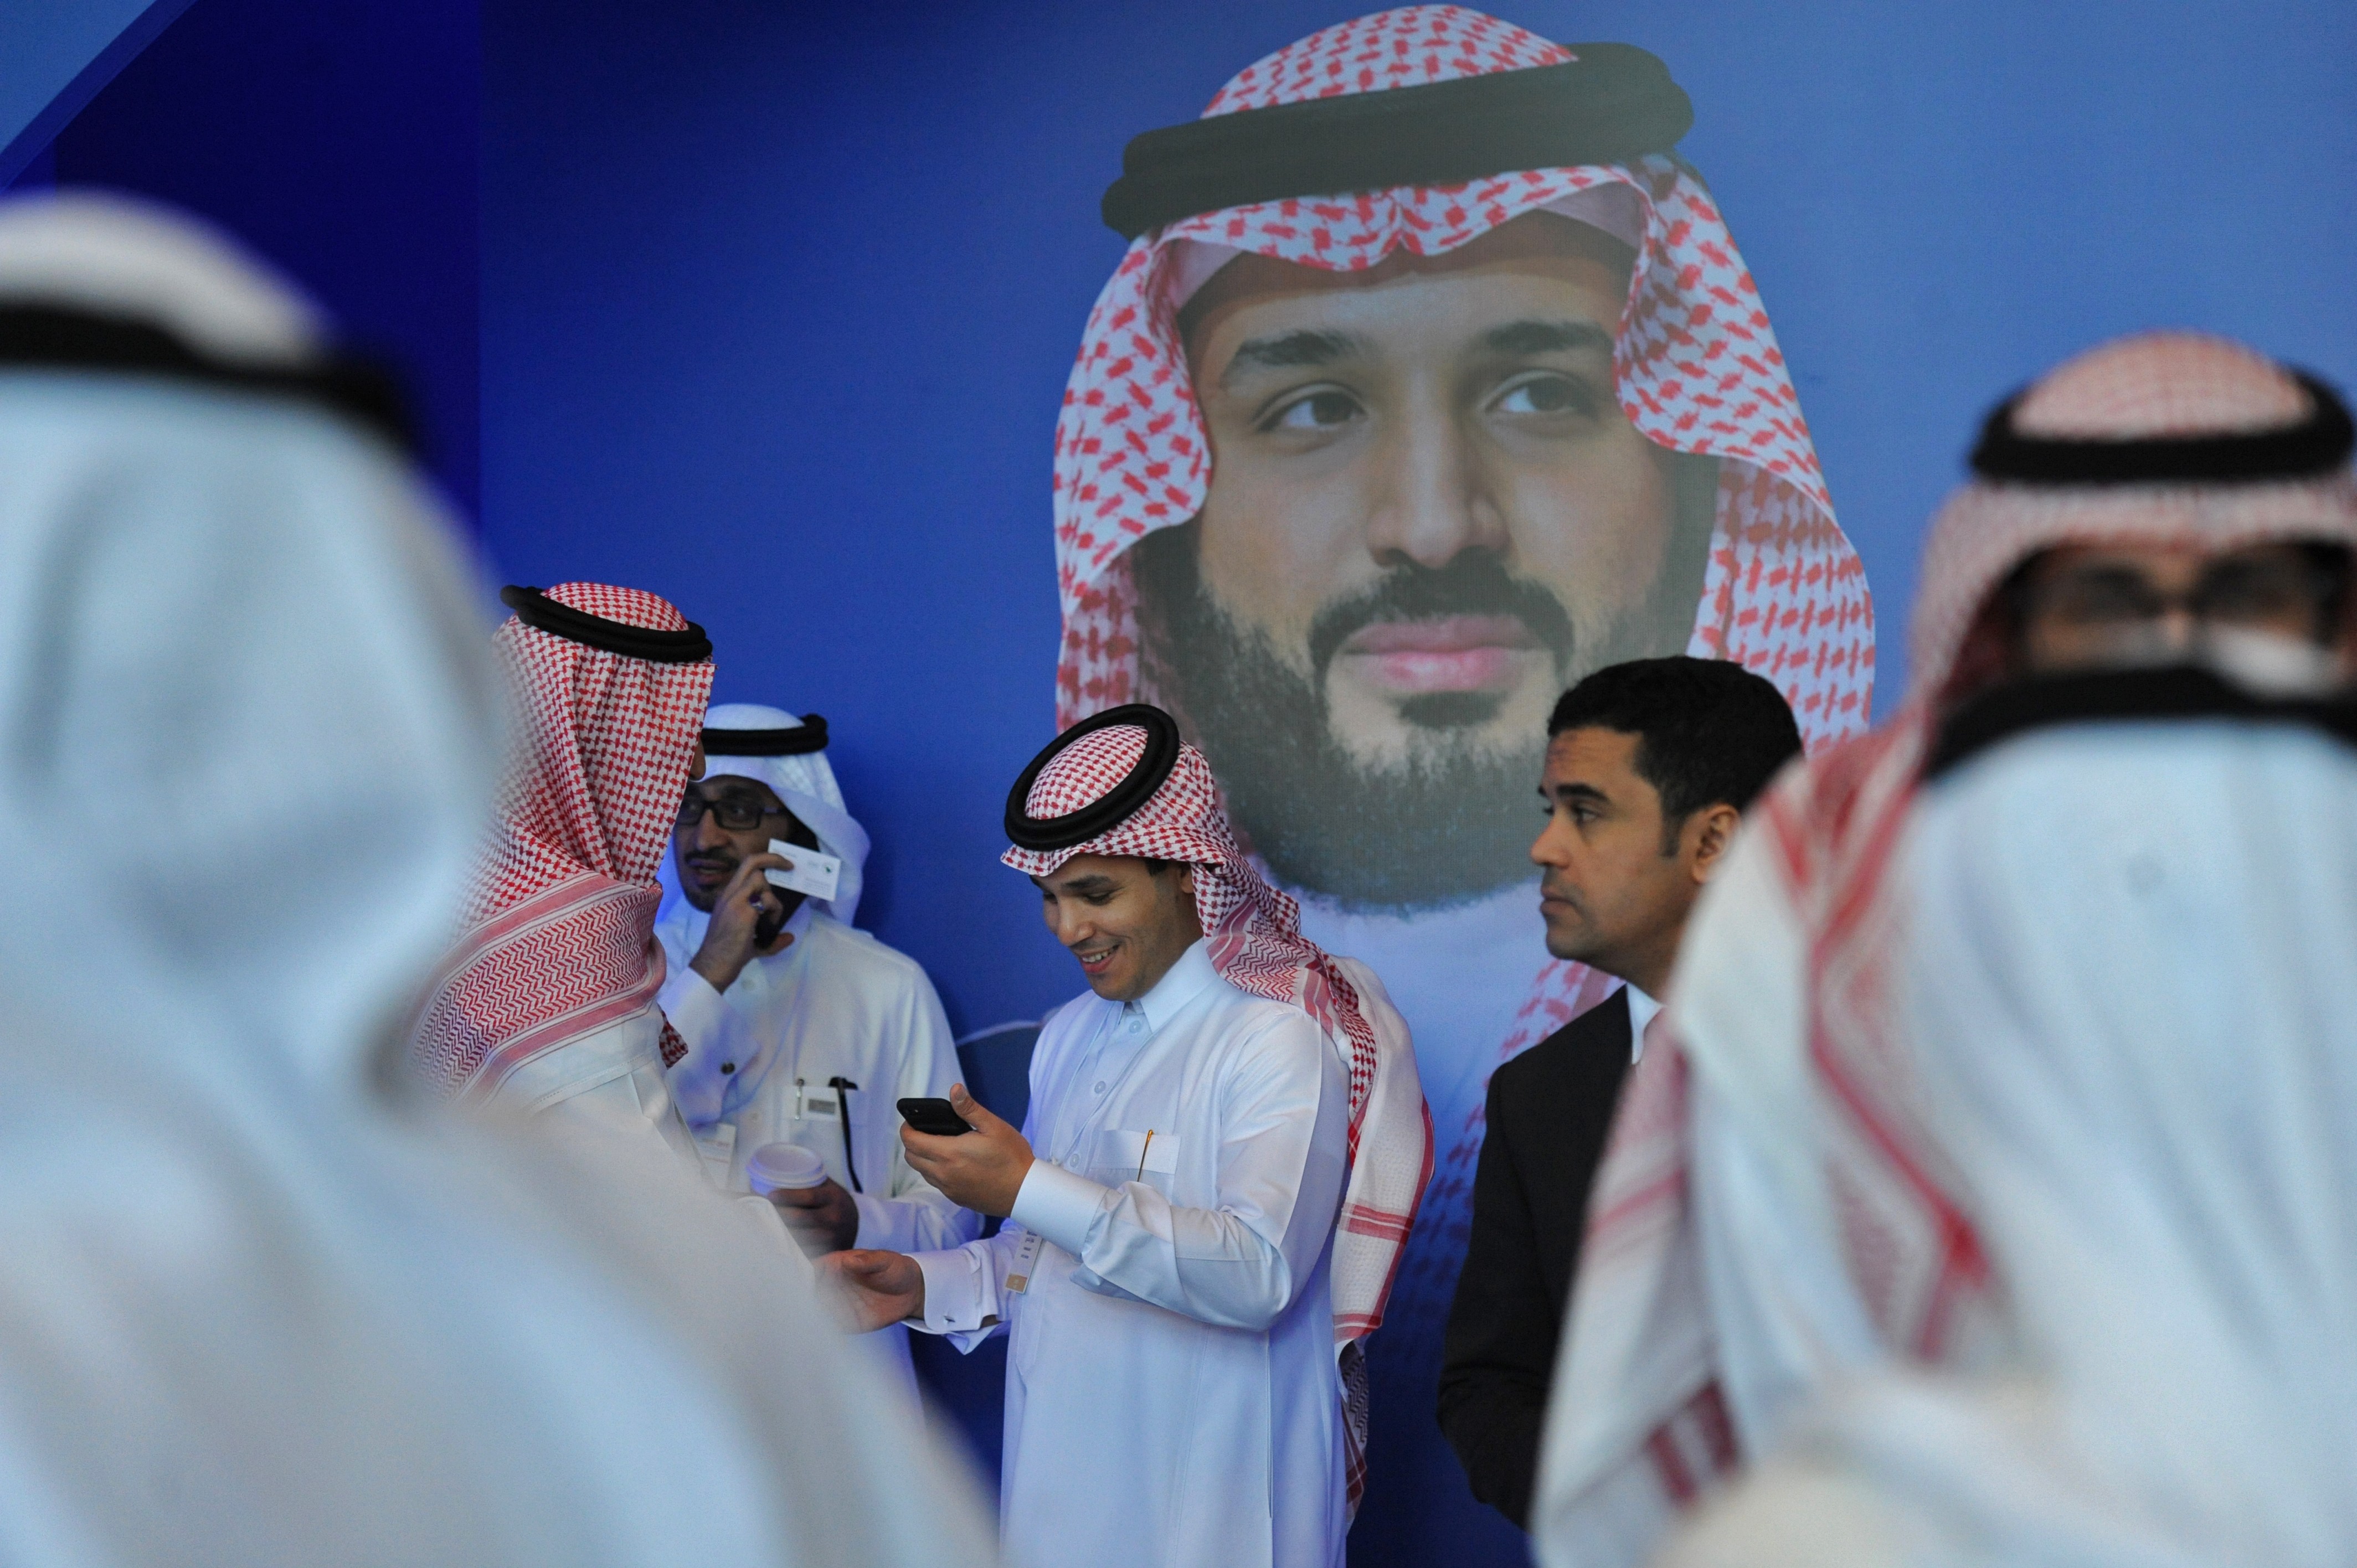 Saudi men chat in front of a poster of Saudi Crown Prince Mohammed bin Salman during the MiSK Global Forum held under the slogan Meeting the Challenge of Change in Riyadh, in November. Photo: AFP